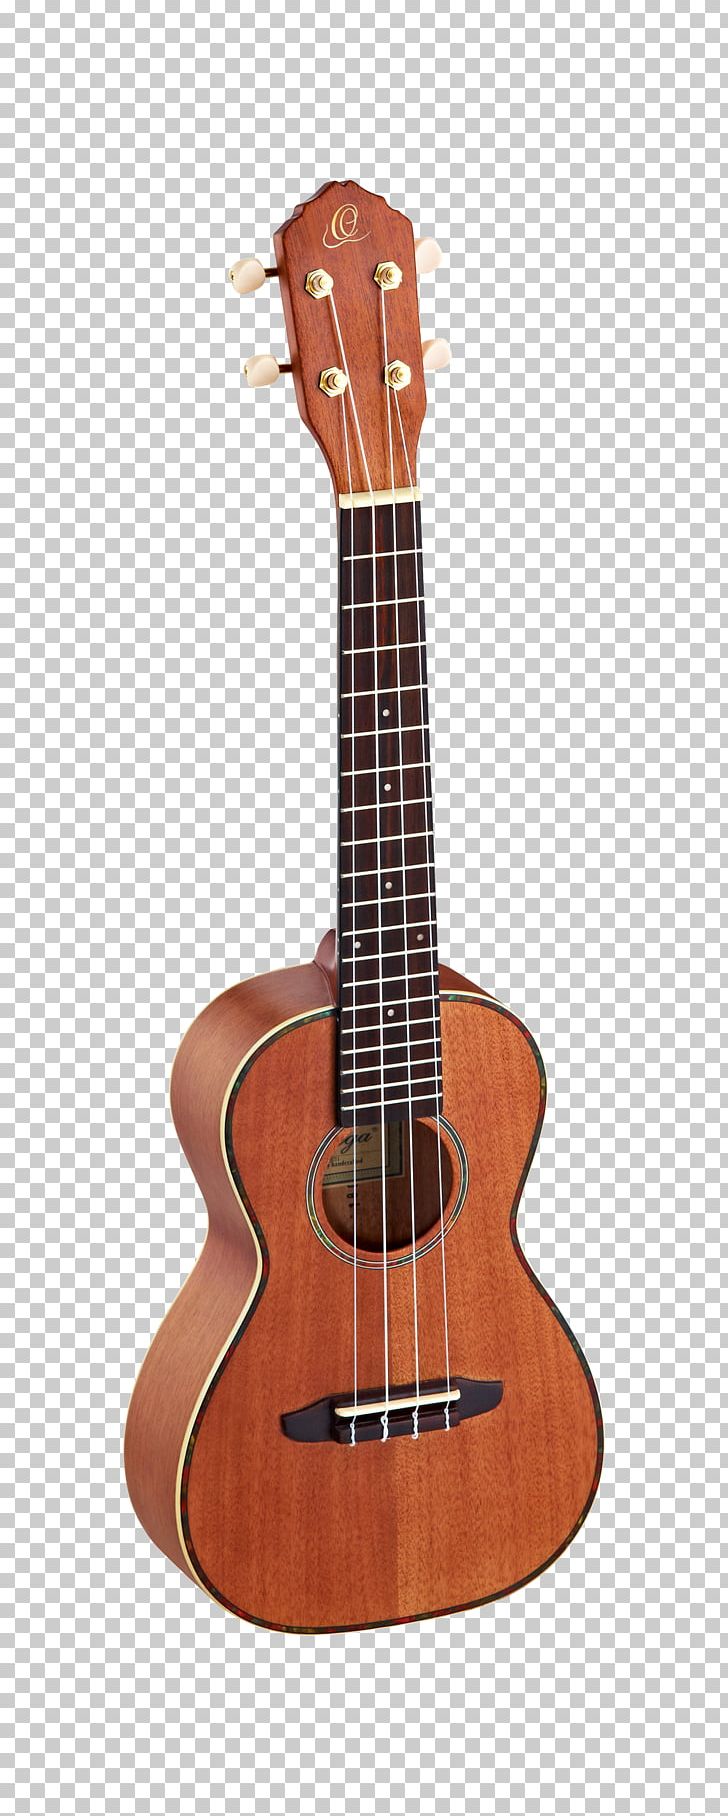 Ukulele Steel-string Acoustic Guitar Musical Instruments Electric Guitar PNG, Clipart, Acoustic Electric Guitar, Amancio Ortega, Classical Guitar, Cuatro, Guitar Accessory Free PNG Download